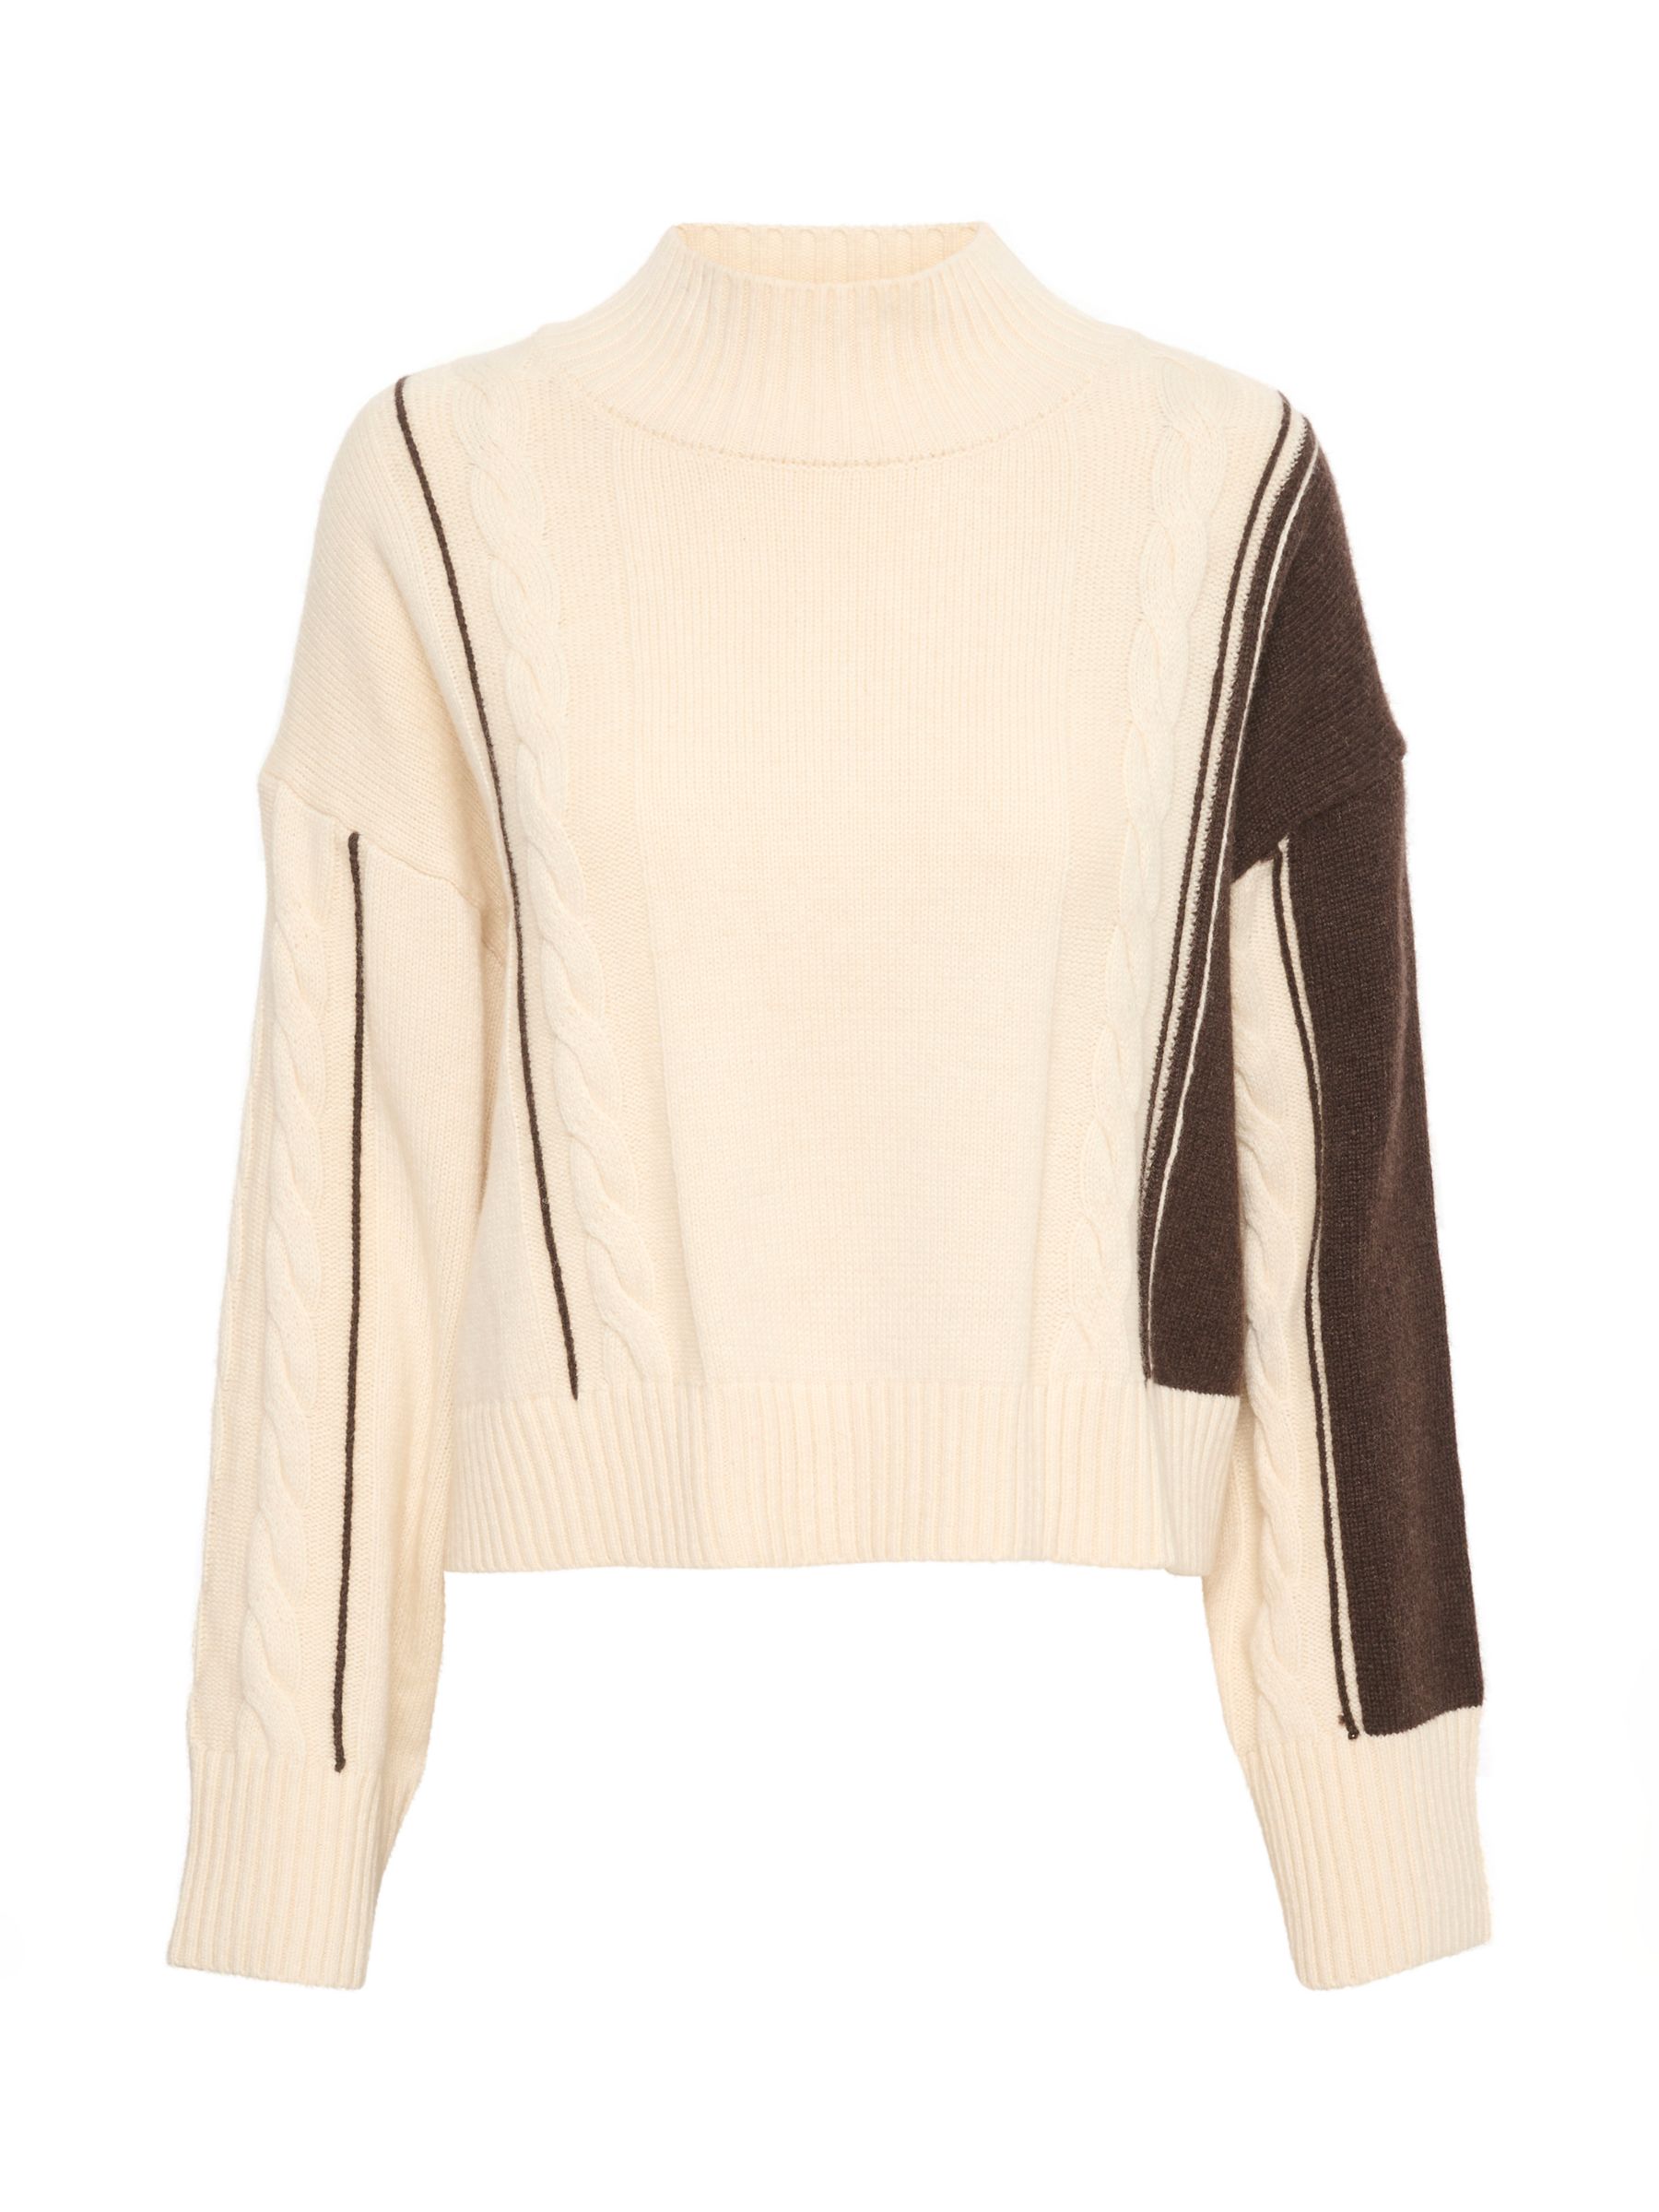 Soaked In Luxury Llena Textured Jumper, White/Multi at John Lewis ...